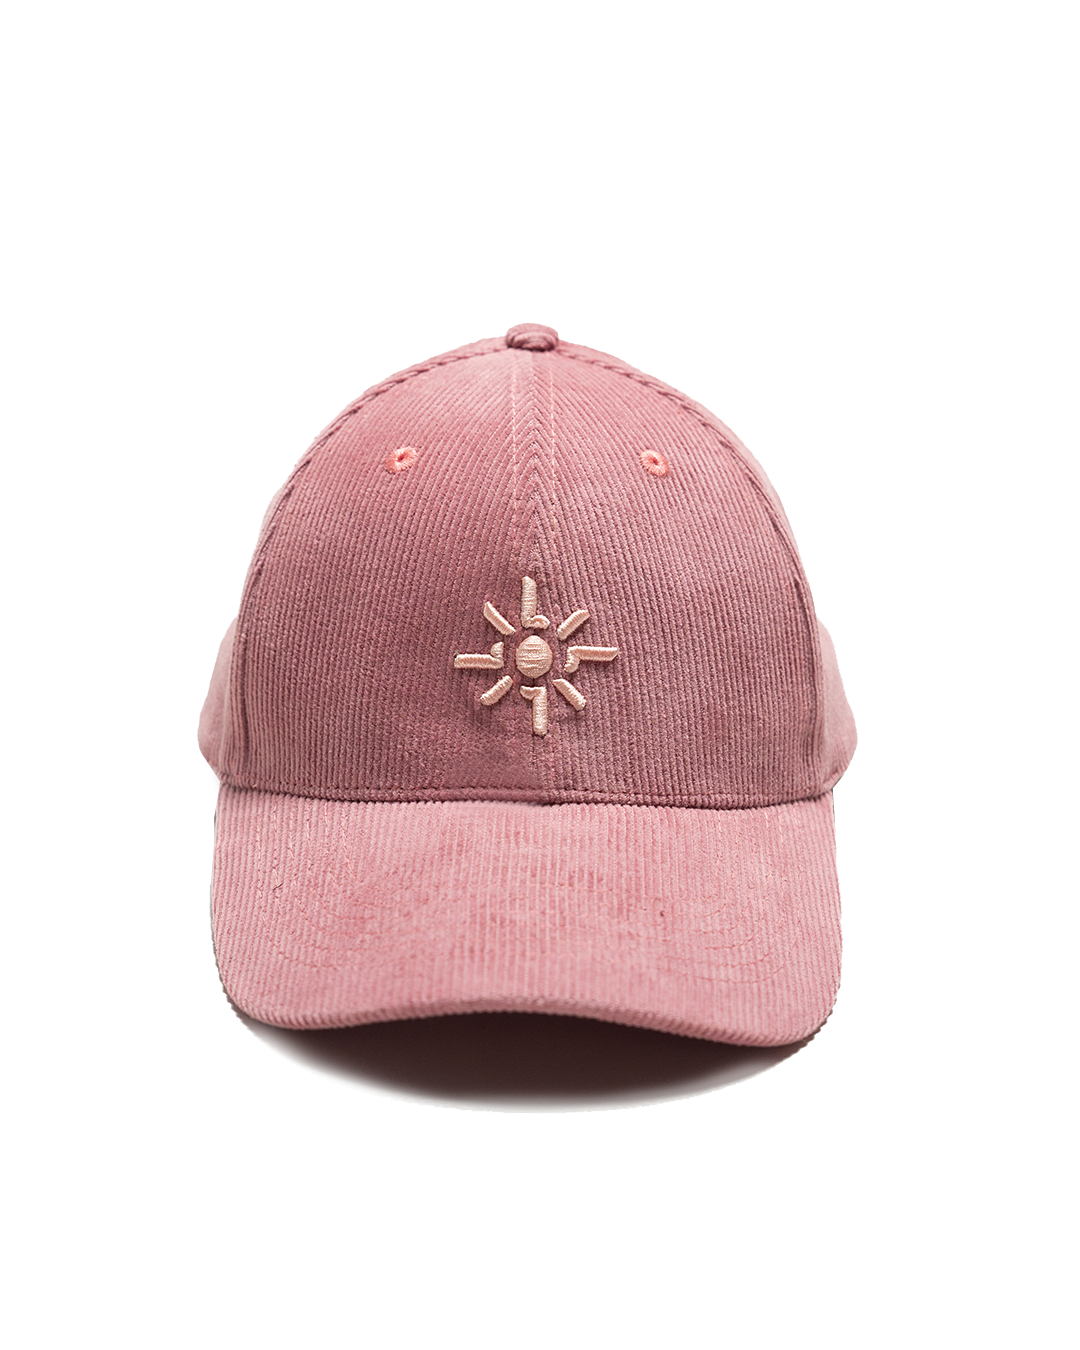 'PINK PUNCH EMBROIDERED LOGO CAP